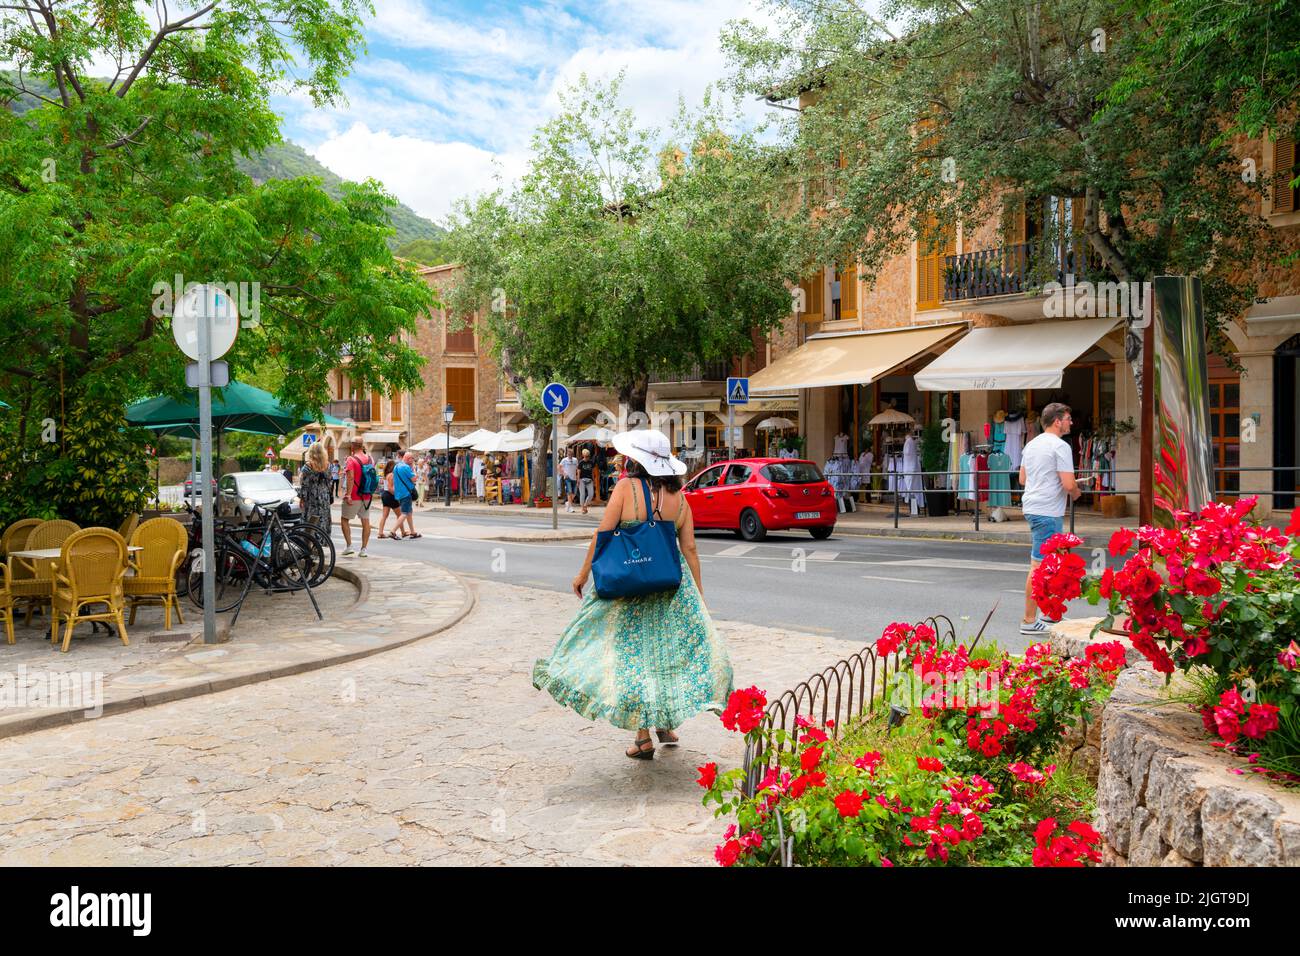 One of the many picturesque tree lined streets of shops and cafes in the hilltop village of Valldemossa, Spain, on the island of Mallorca, Spain. Stock Photo